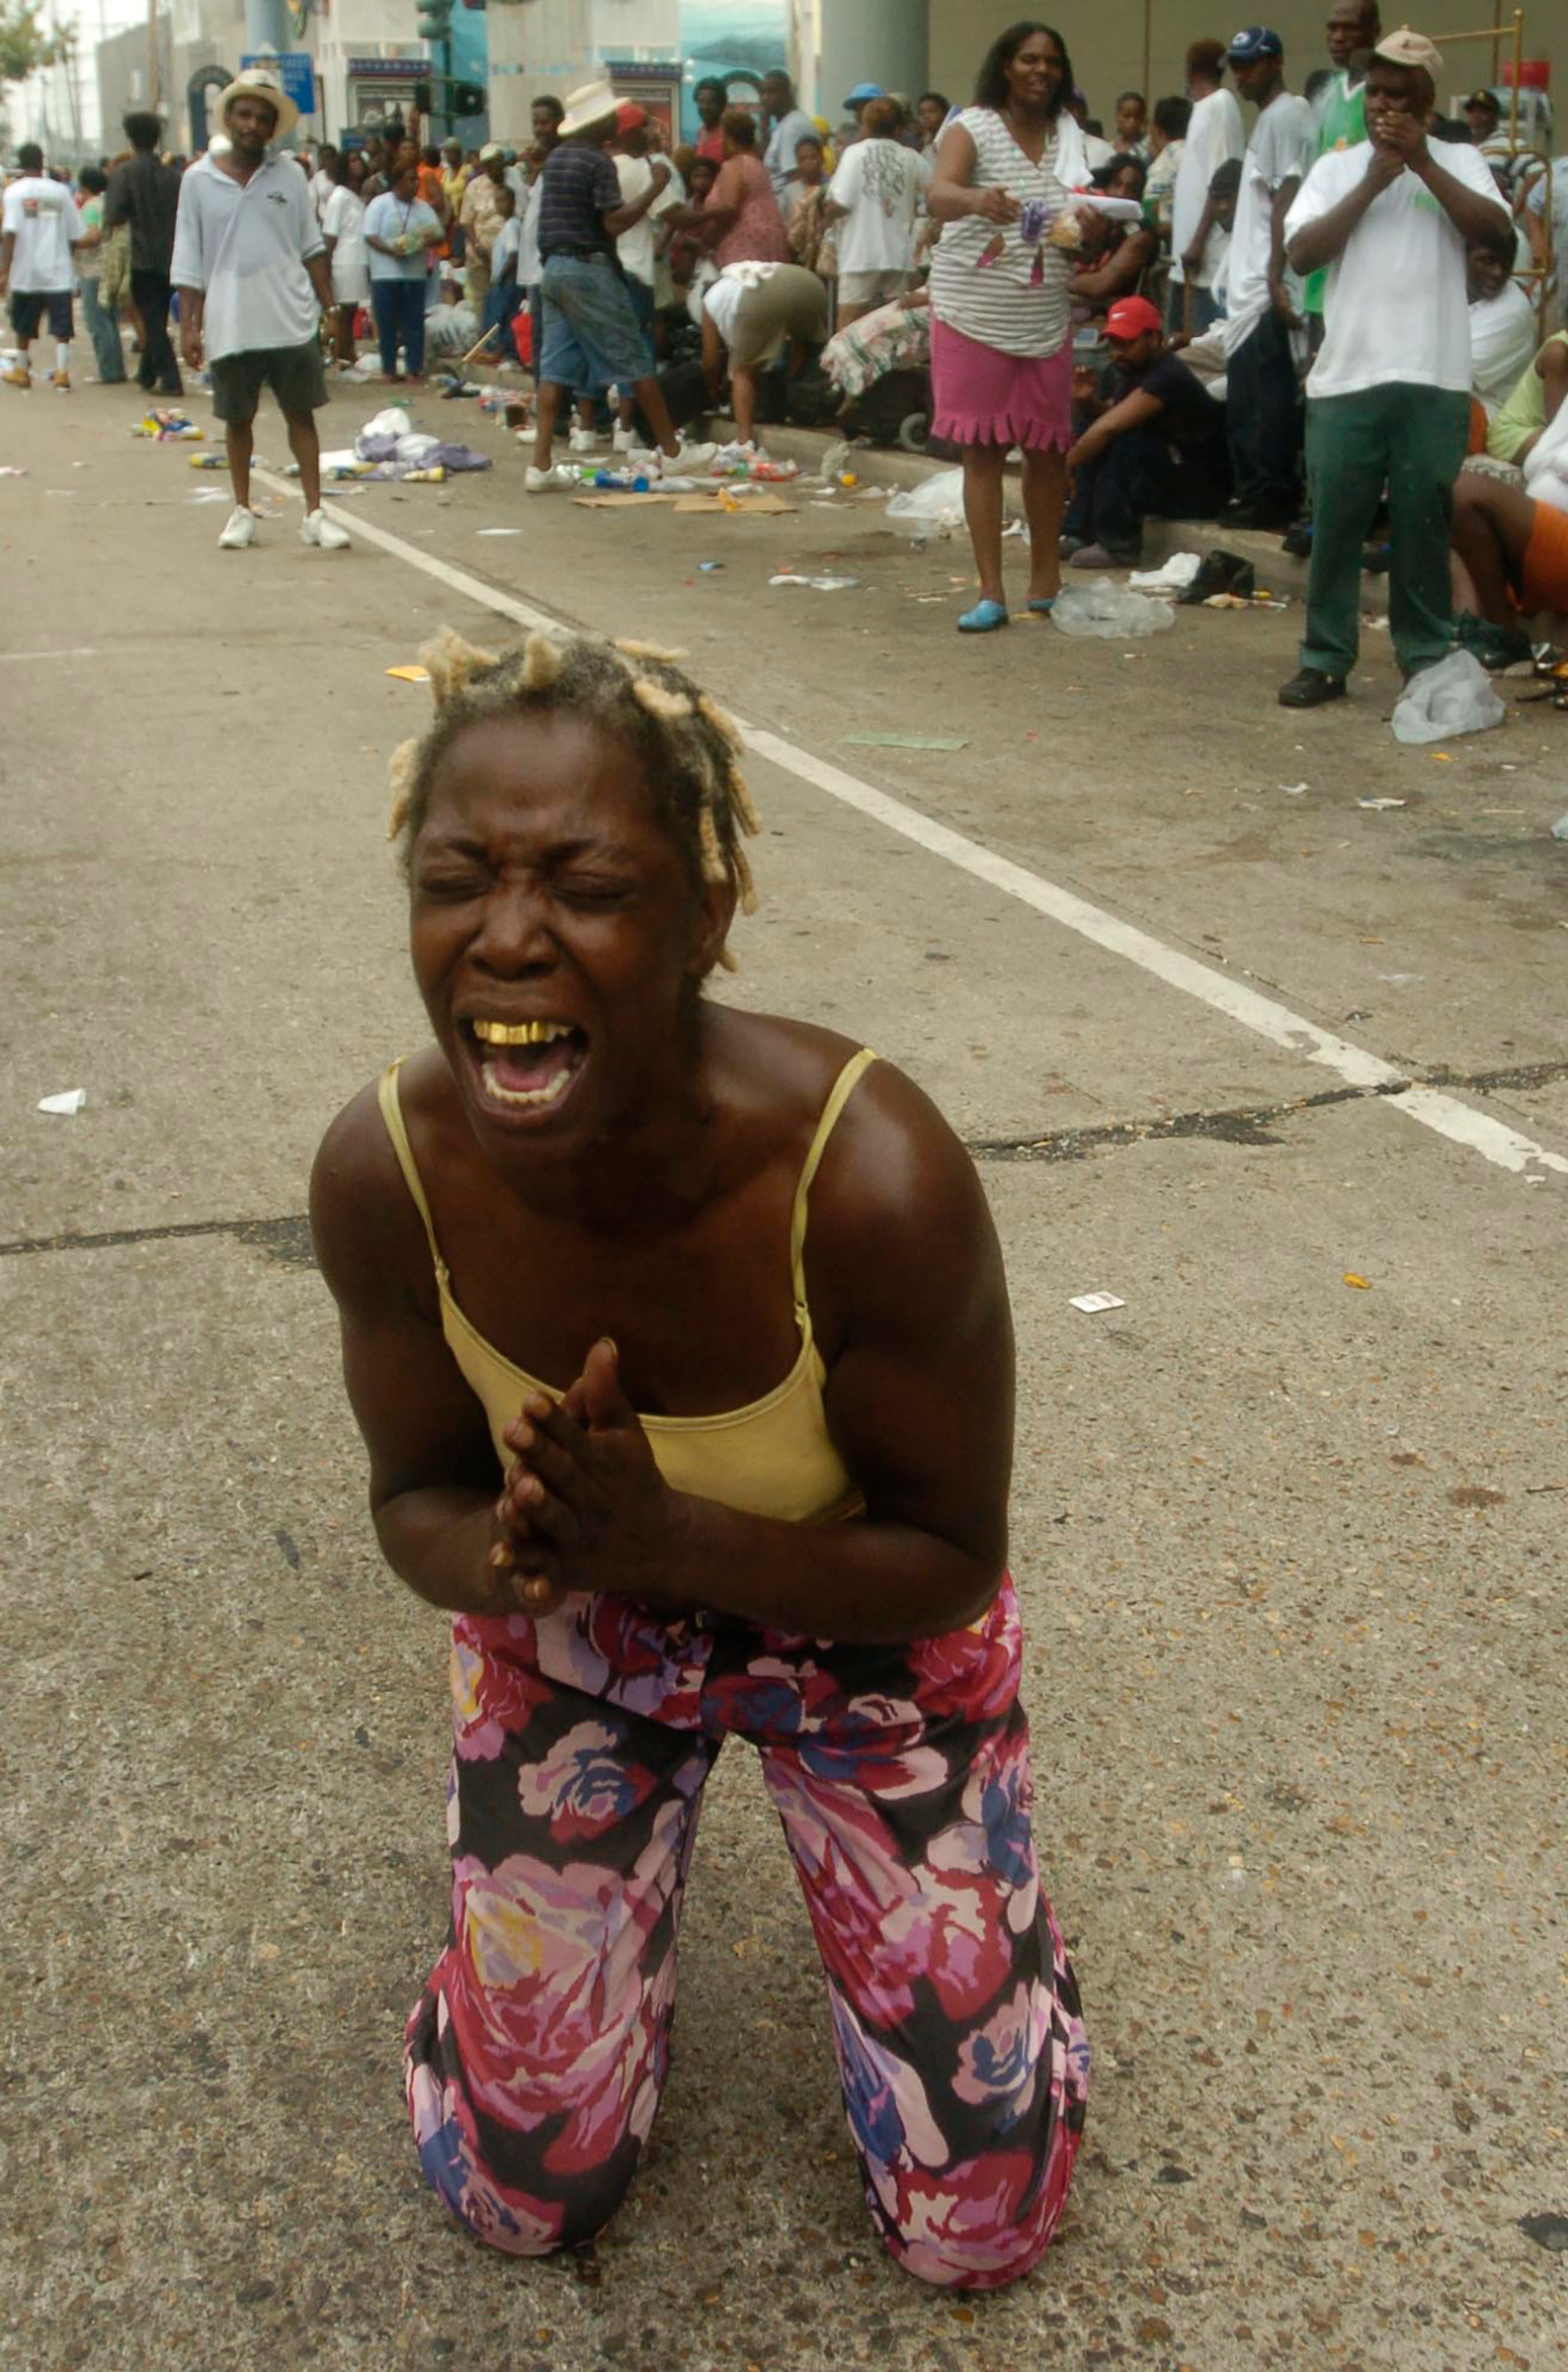 Angela Perkins drops to her knees asking for help among thousands of people gathered at the New Orleans Convention Center waiting in the aftermath of Hurricane Katrina on Sept. 1, 2005